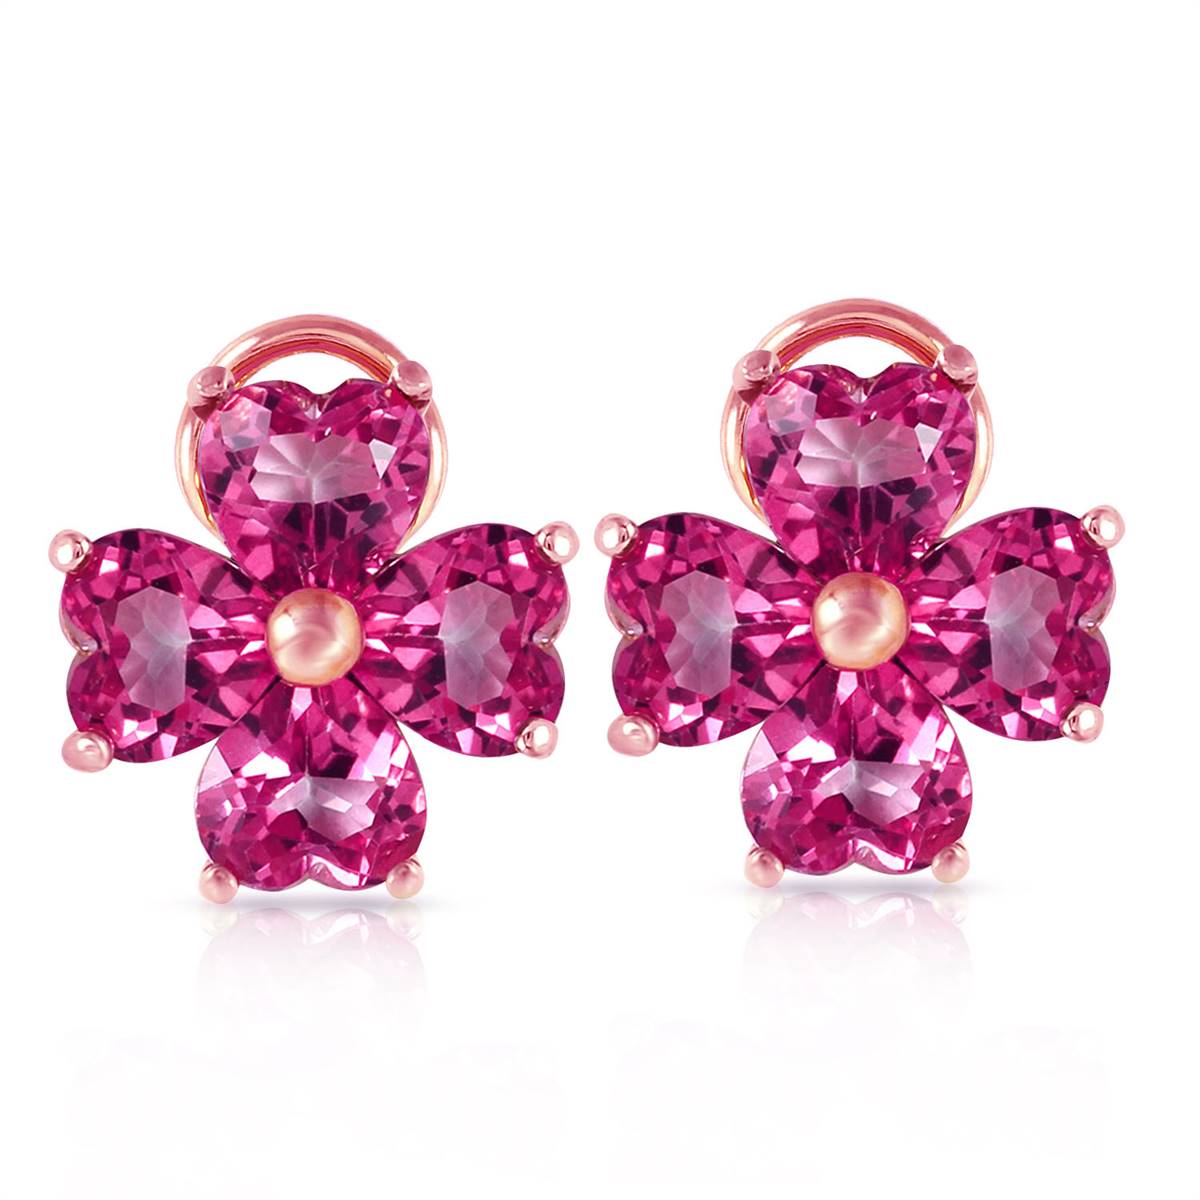 7.6 Carat 14K Solid Rose Gold French Clips Earrings Natural Pink Topaz